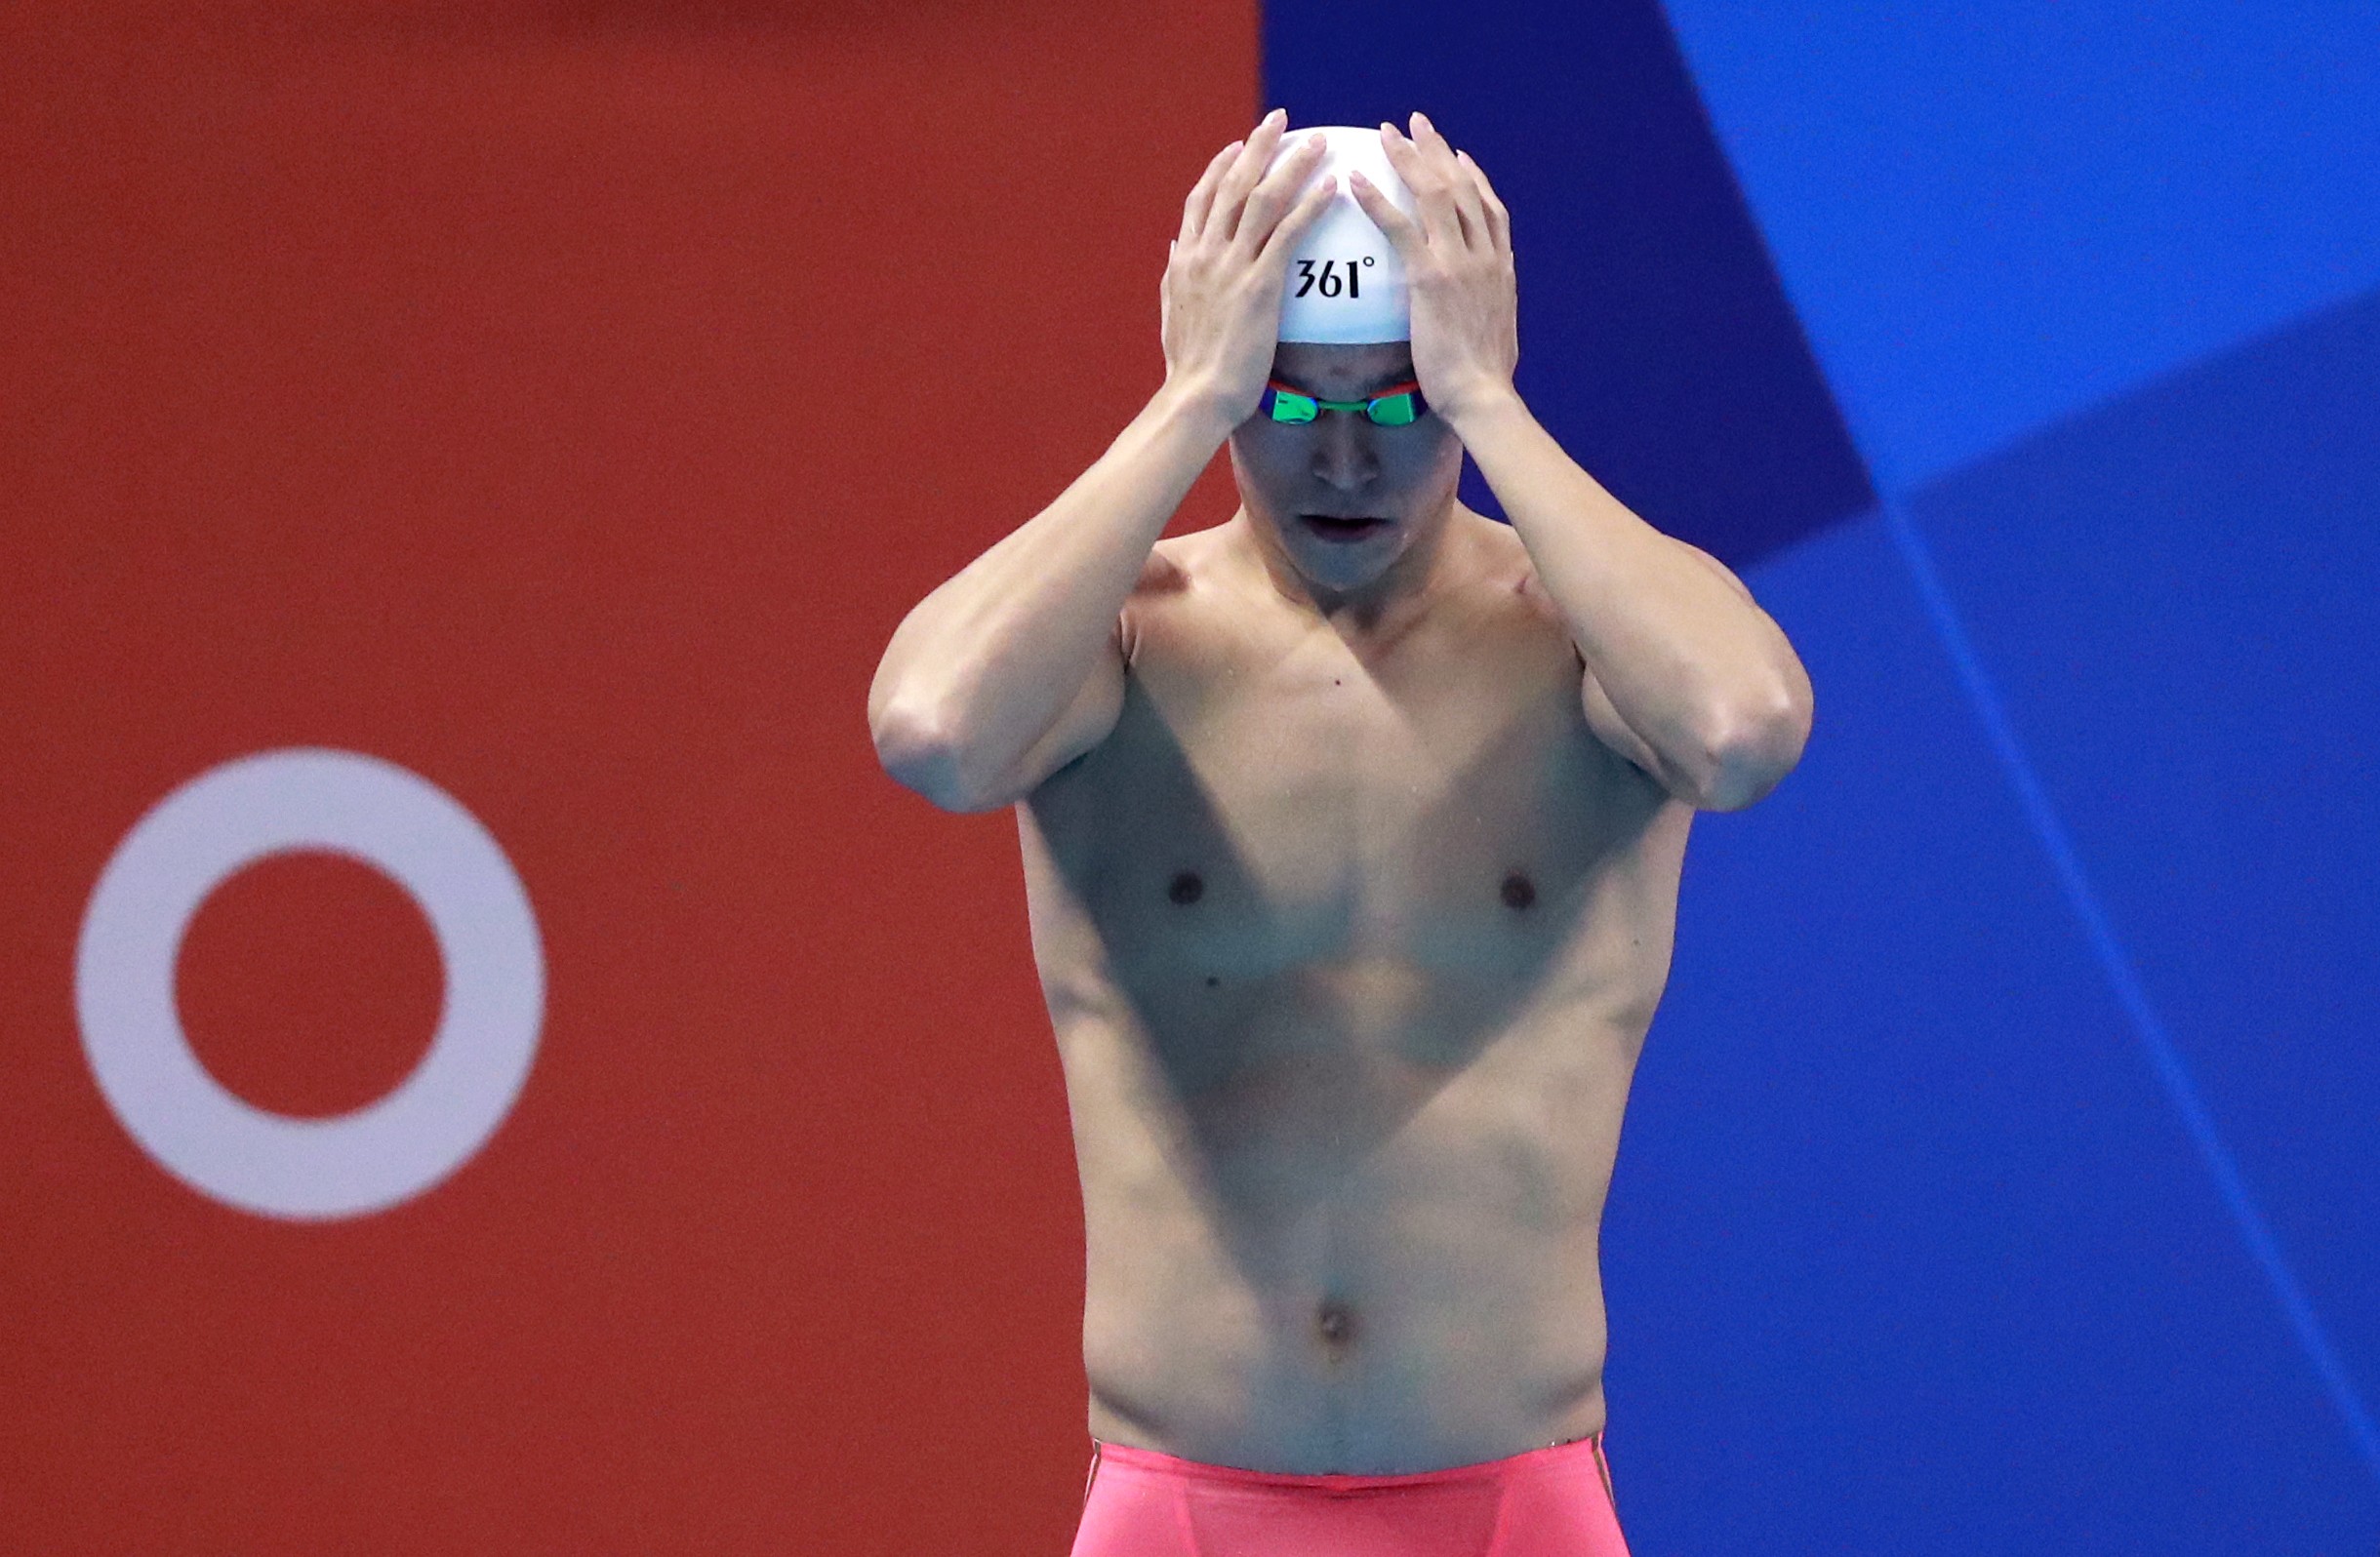 China's Sun Yang did not actually fail a scheduled test in 2018, because his entourage smashed vials containing his blood after he disputed the accreditation of the test officials and he refused to provide samples. Photo: AP